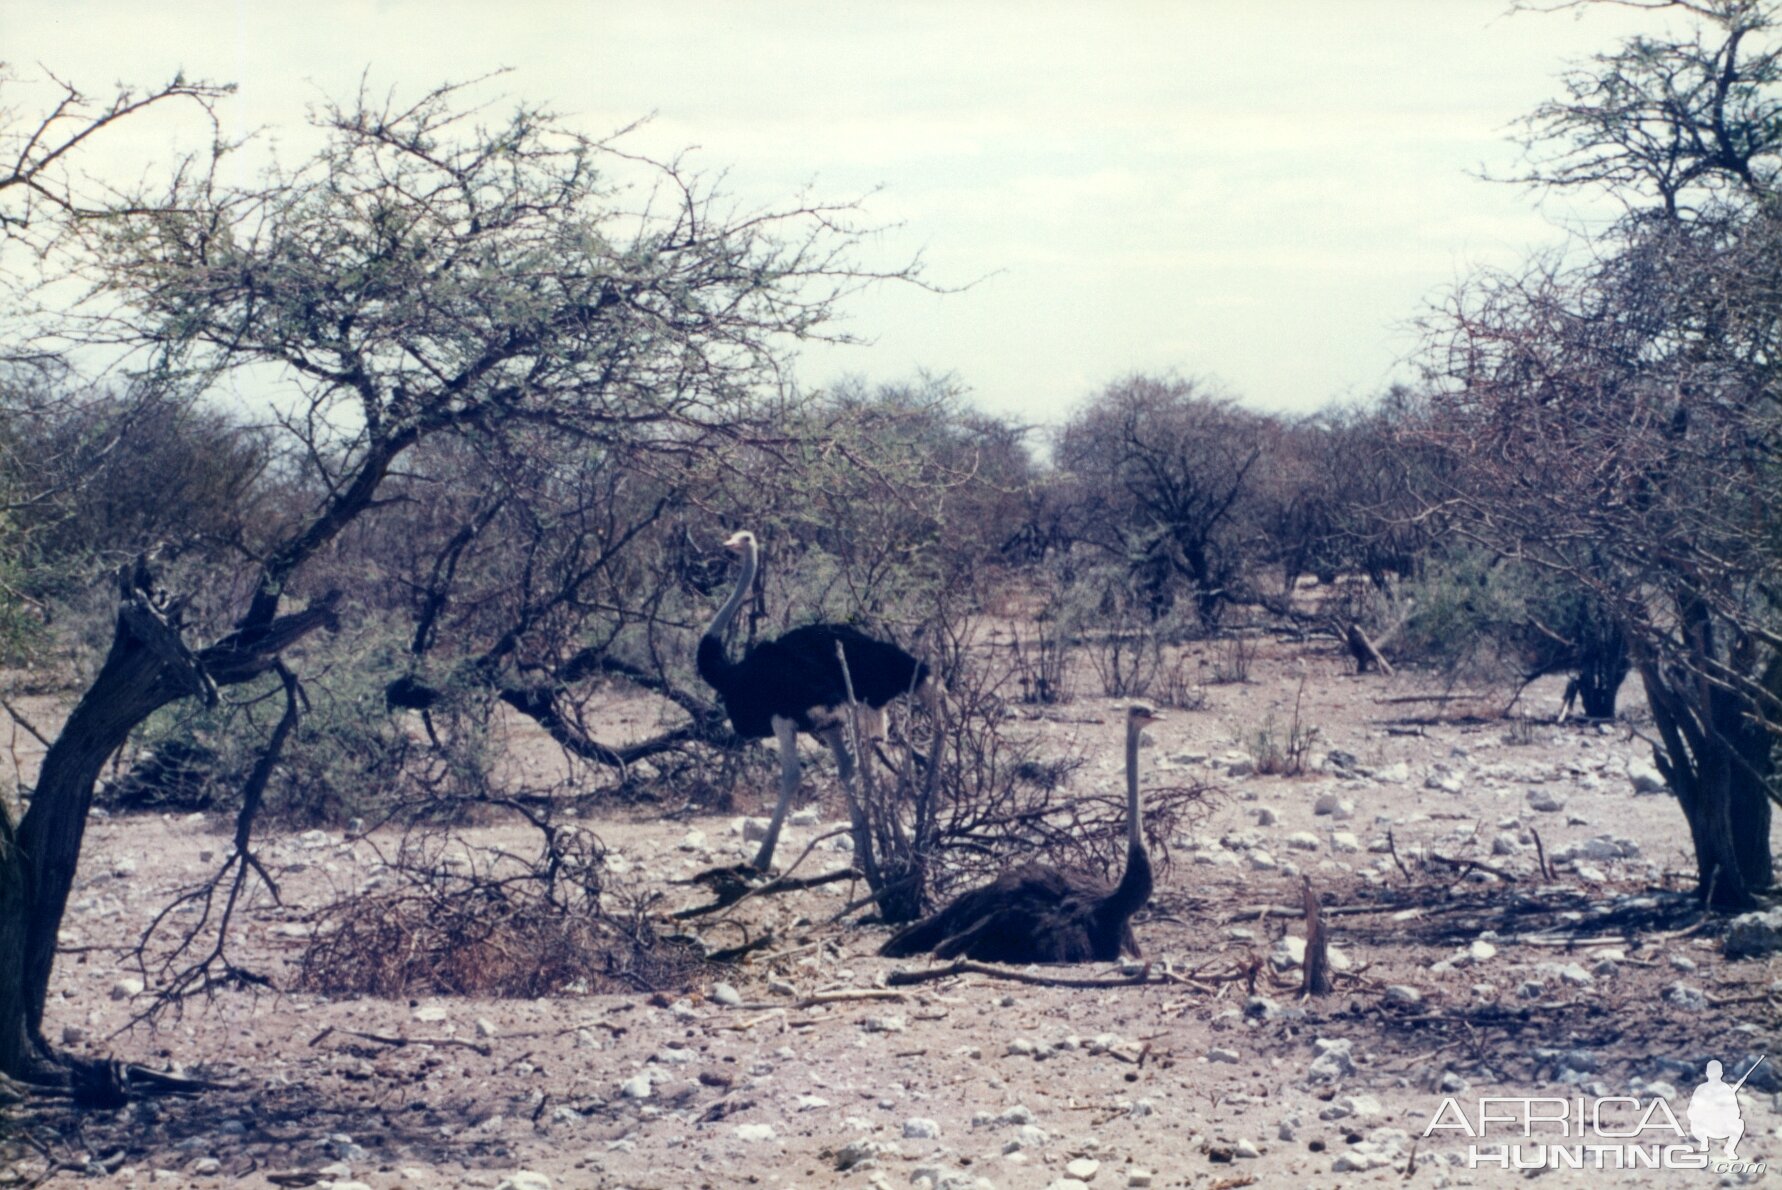 Ostrich at Etosha National Park in Namibia